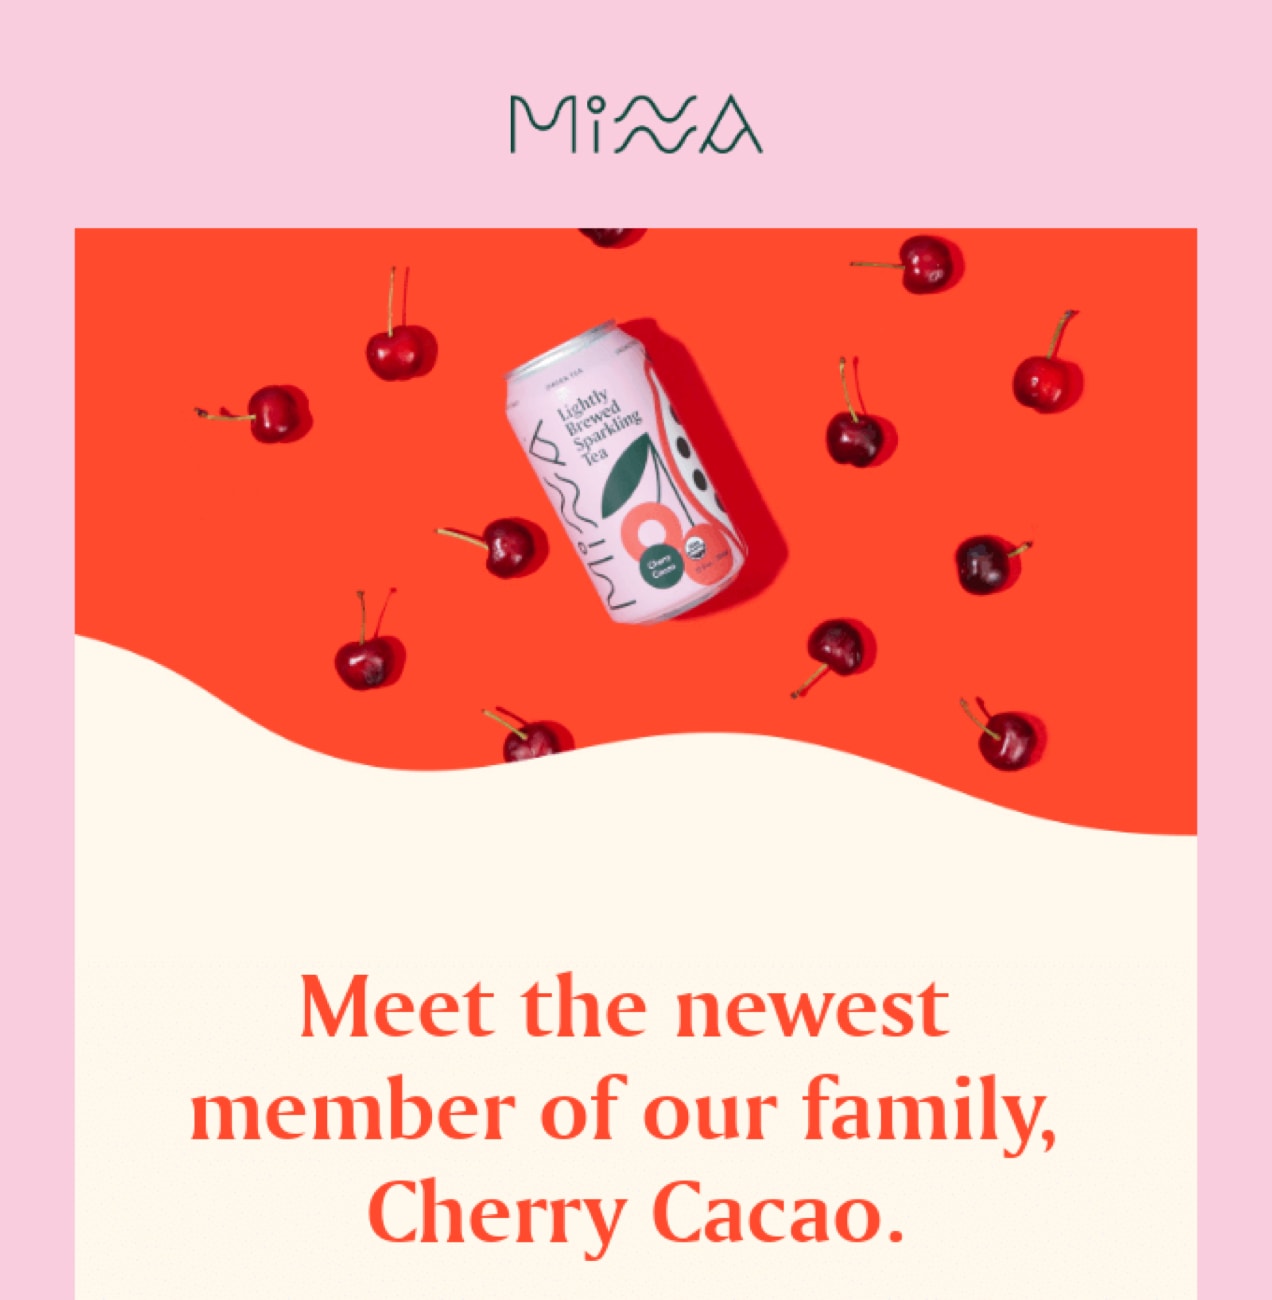 A designed email from Minna with bright colors and patterns